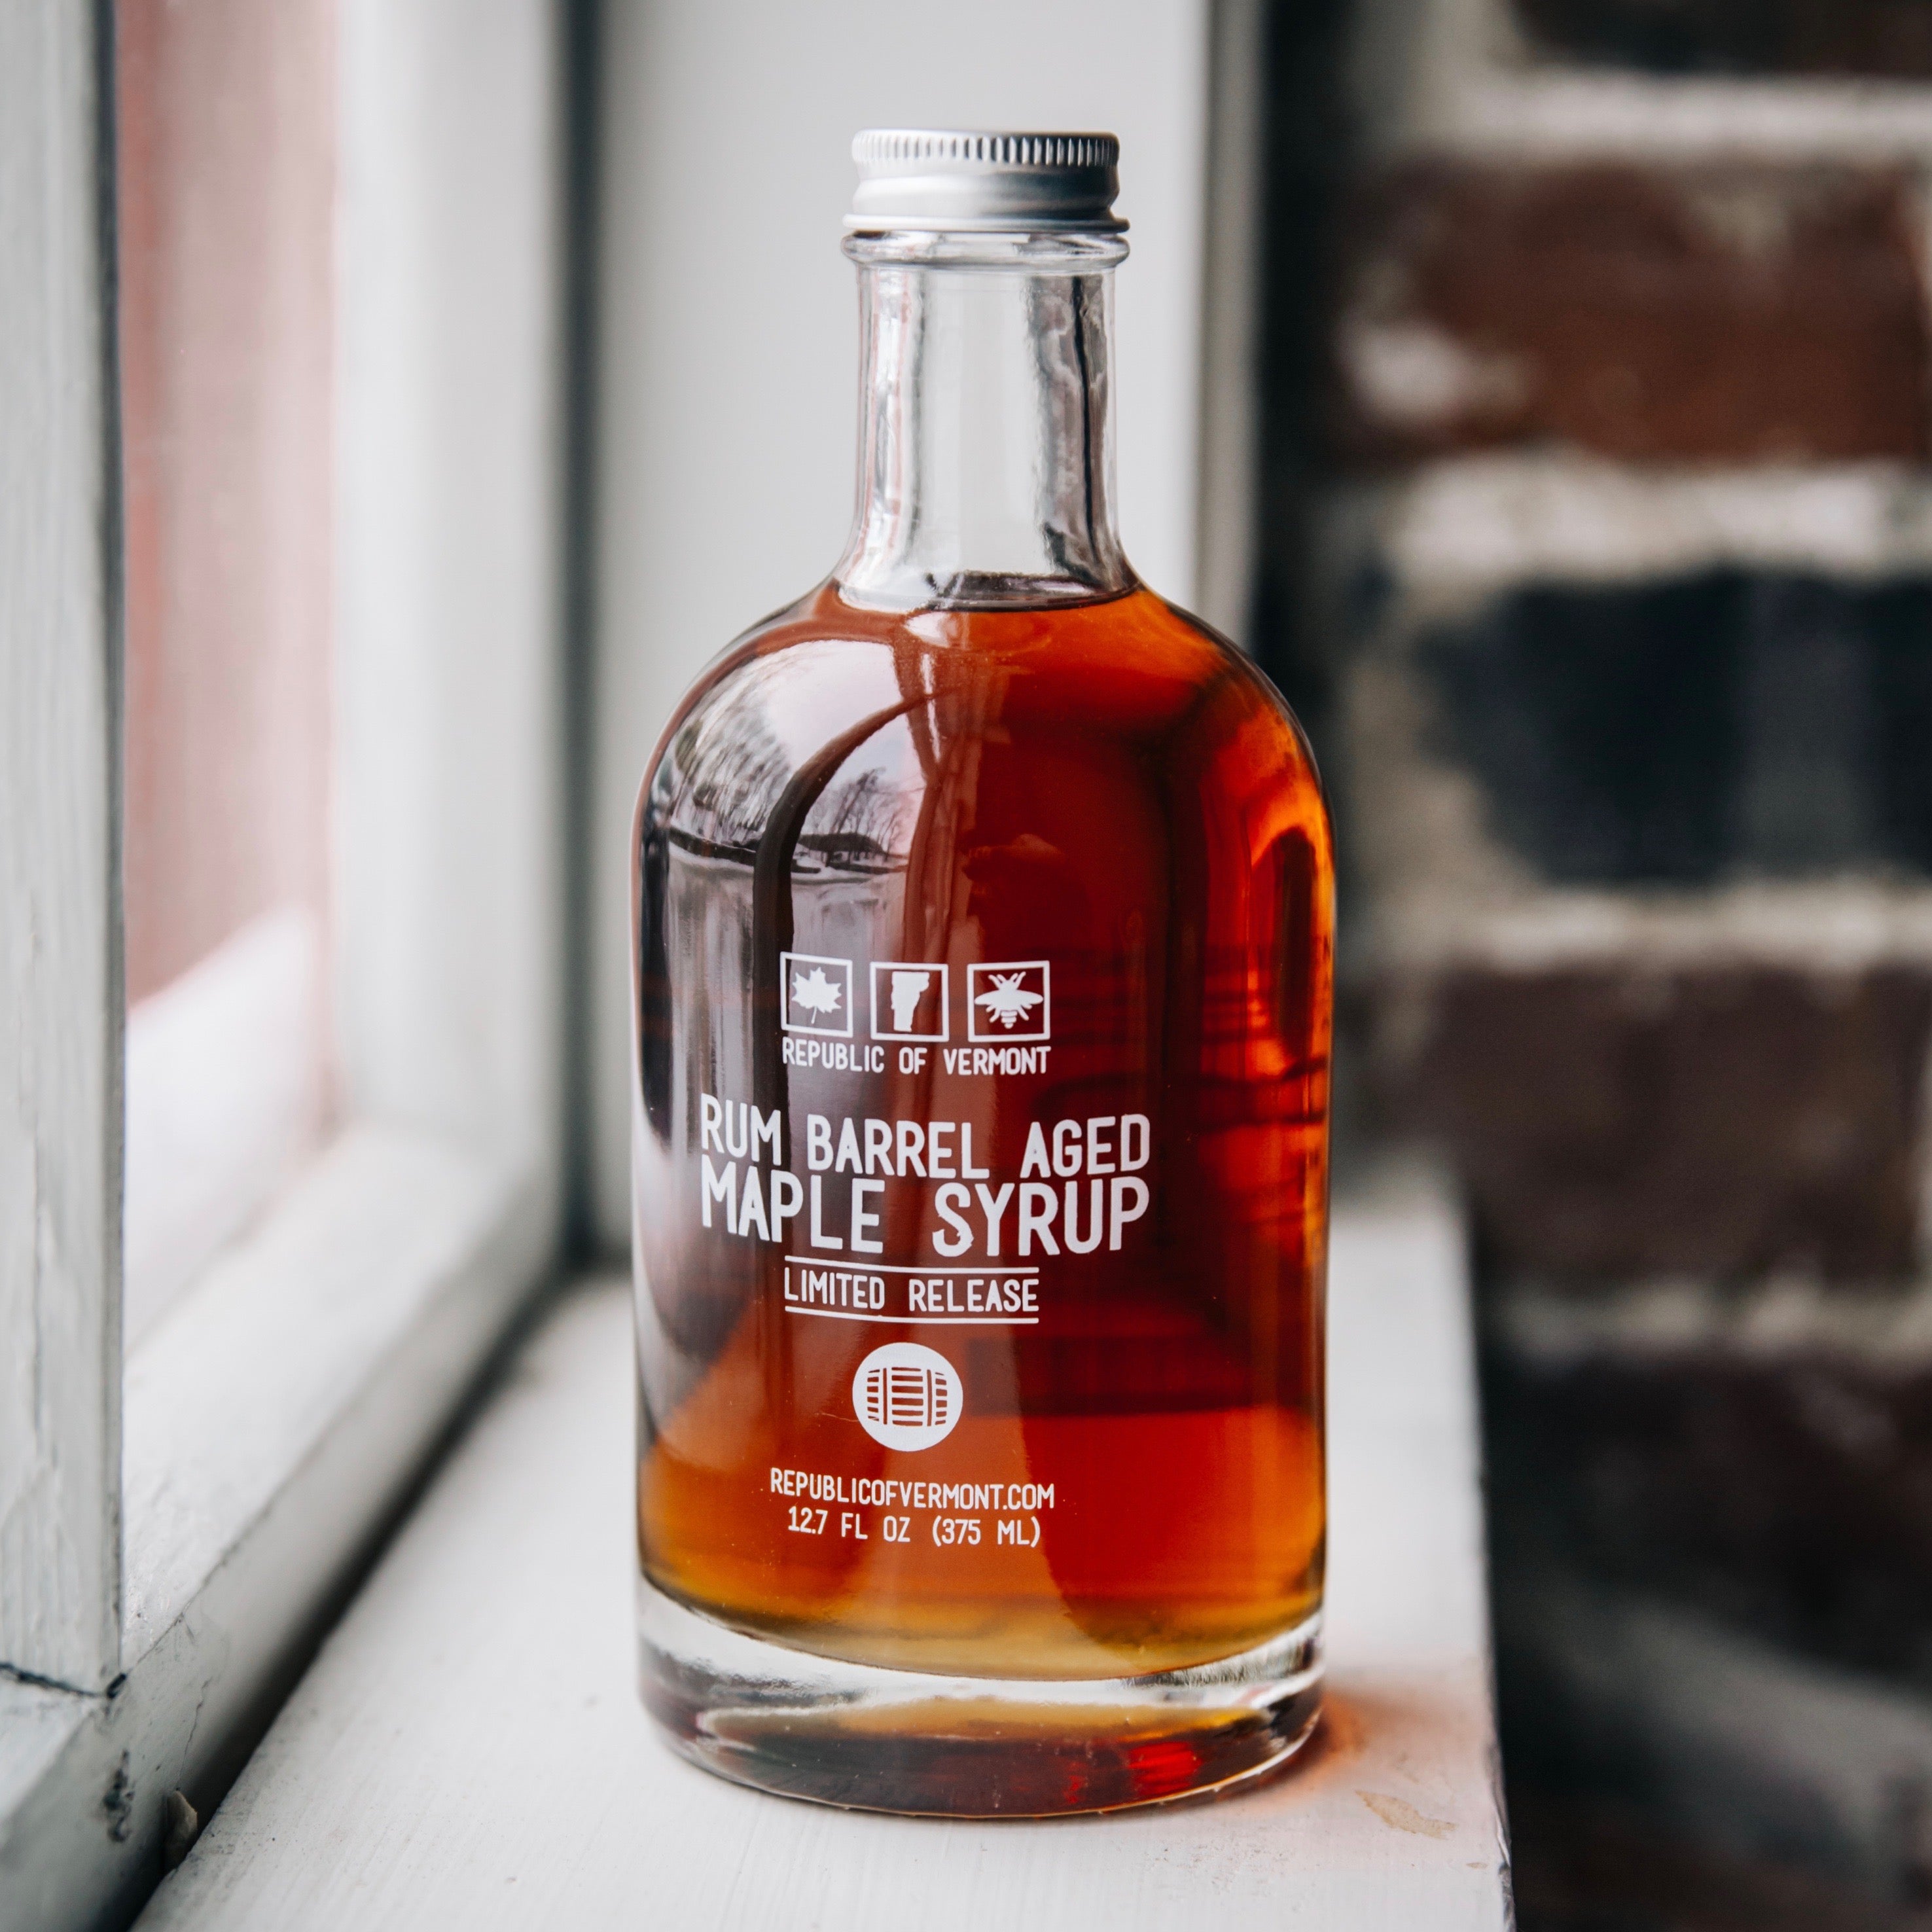 Rum Barrel Aged Maple Syrup